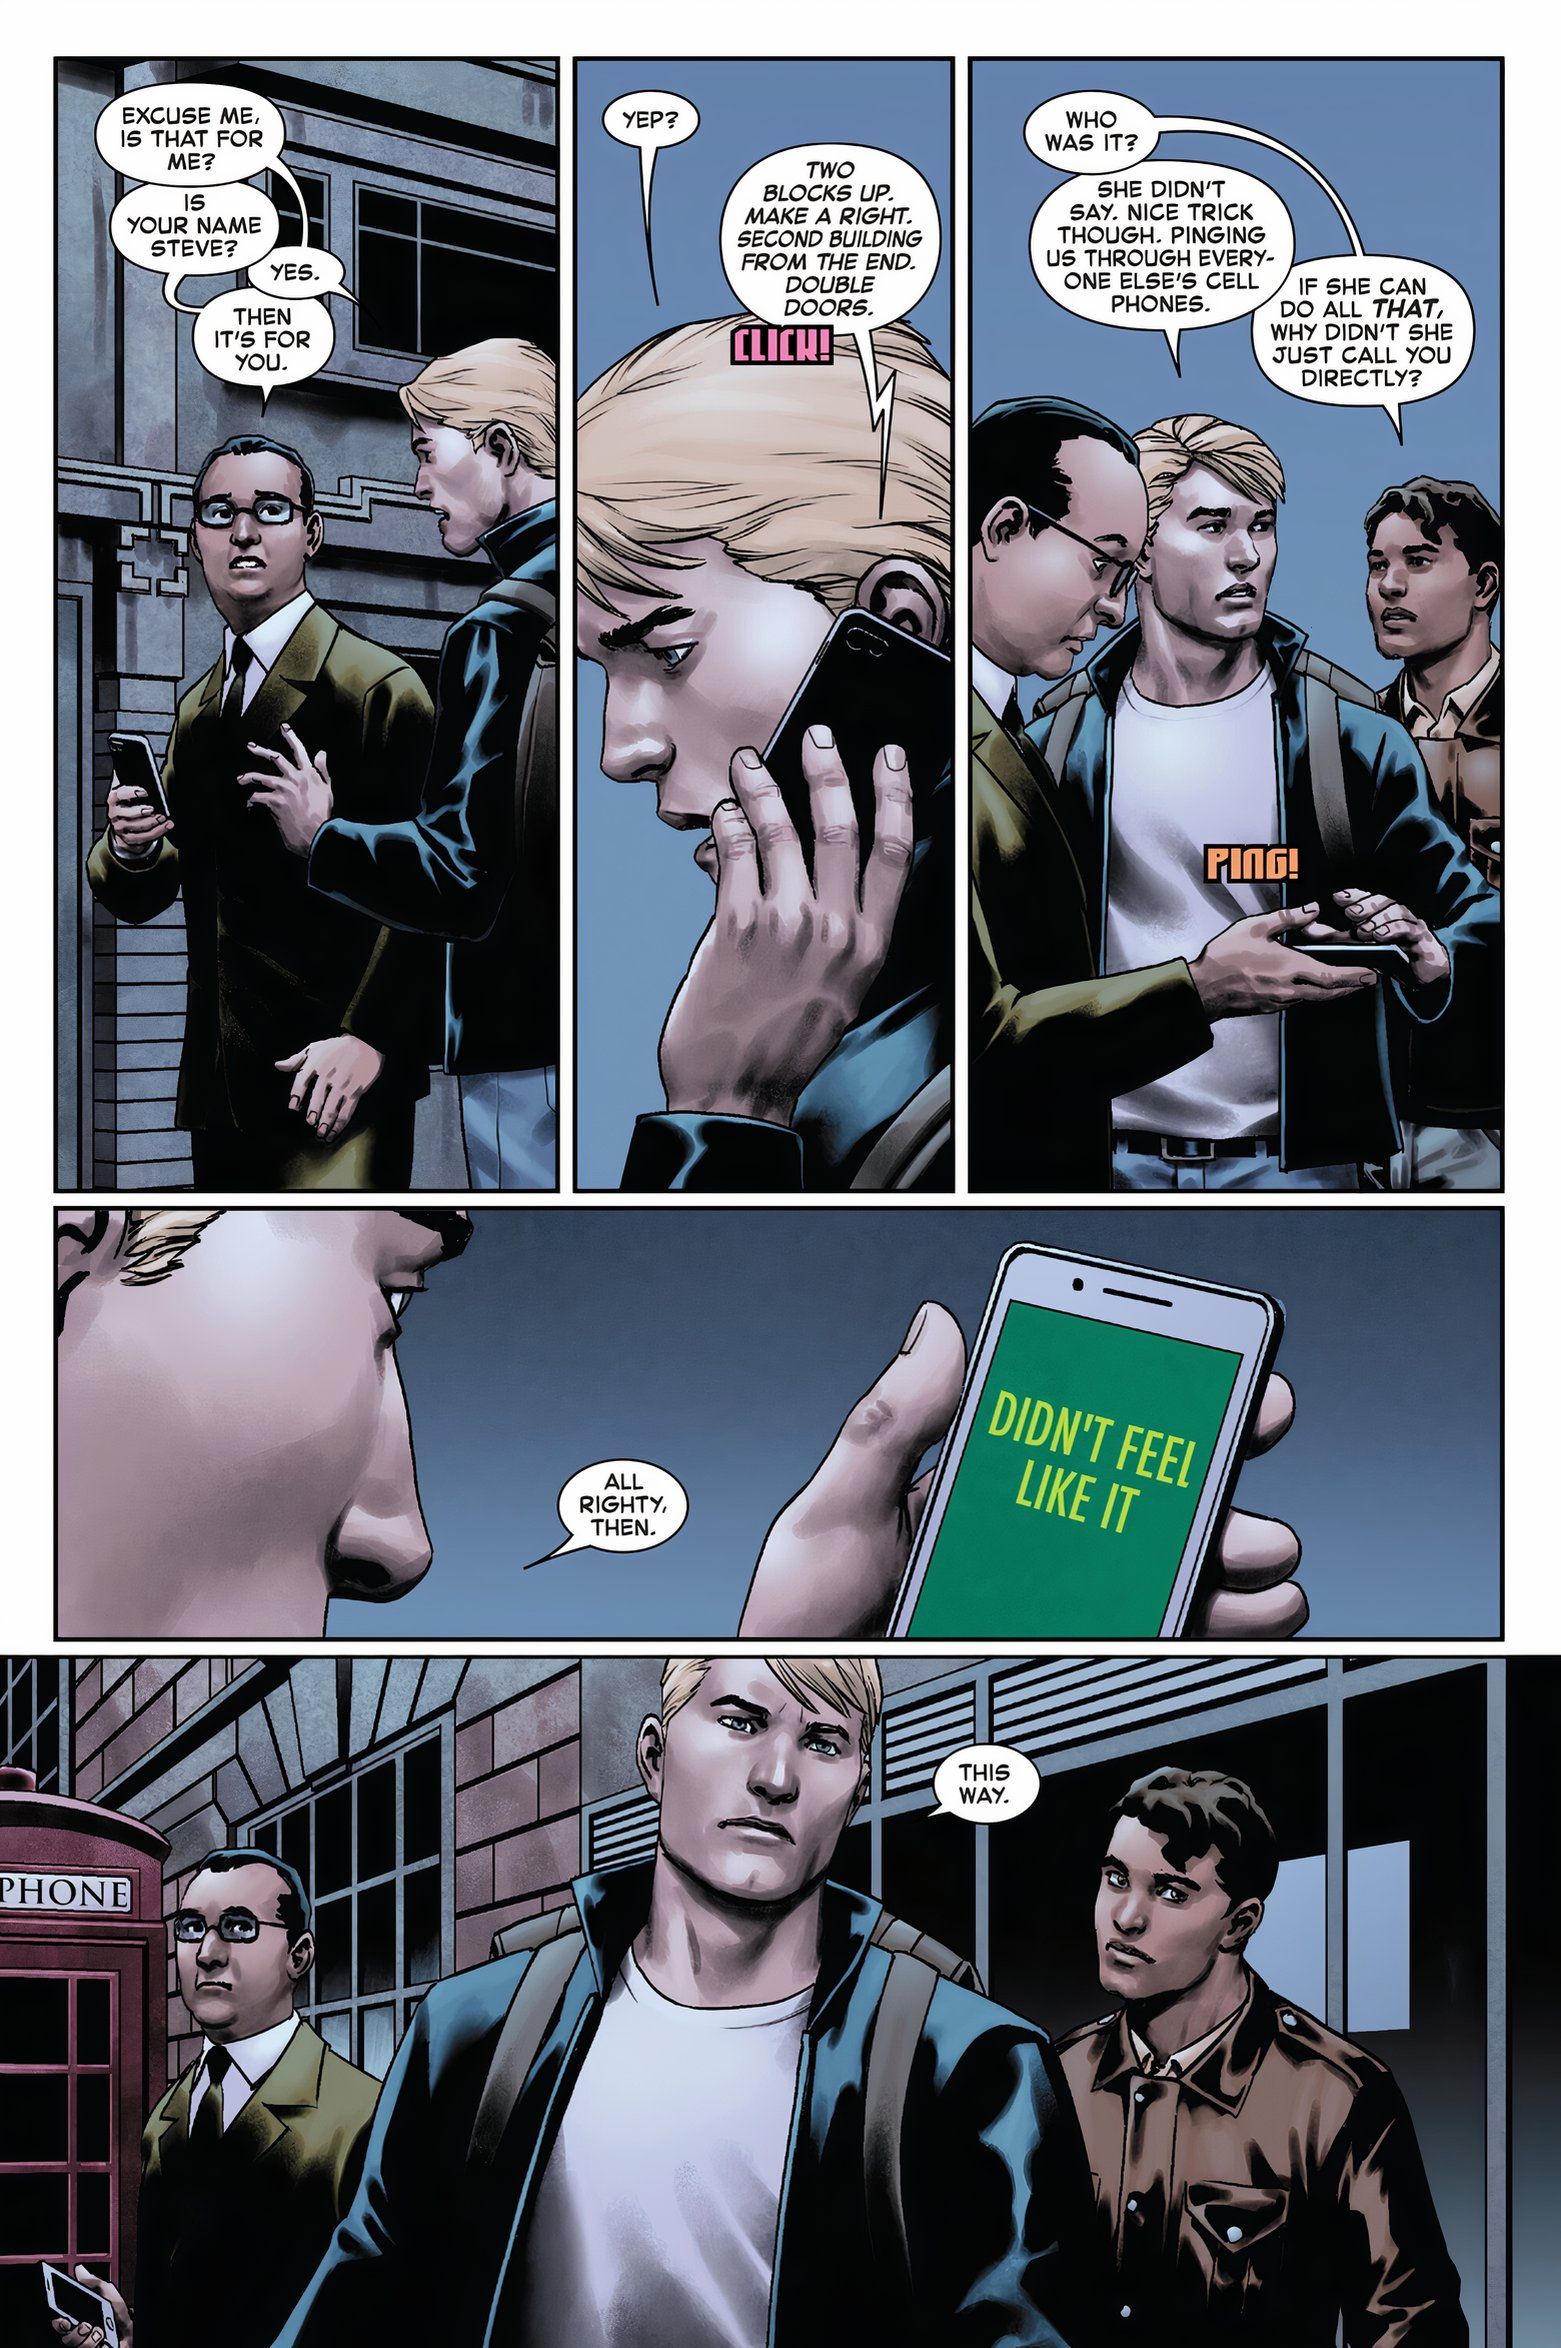 Captain America receives messages on phones from the mutant Seer. 